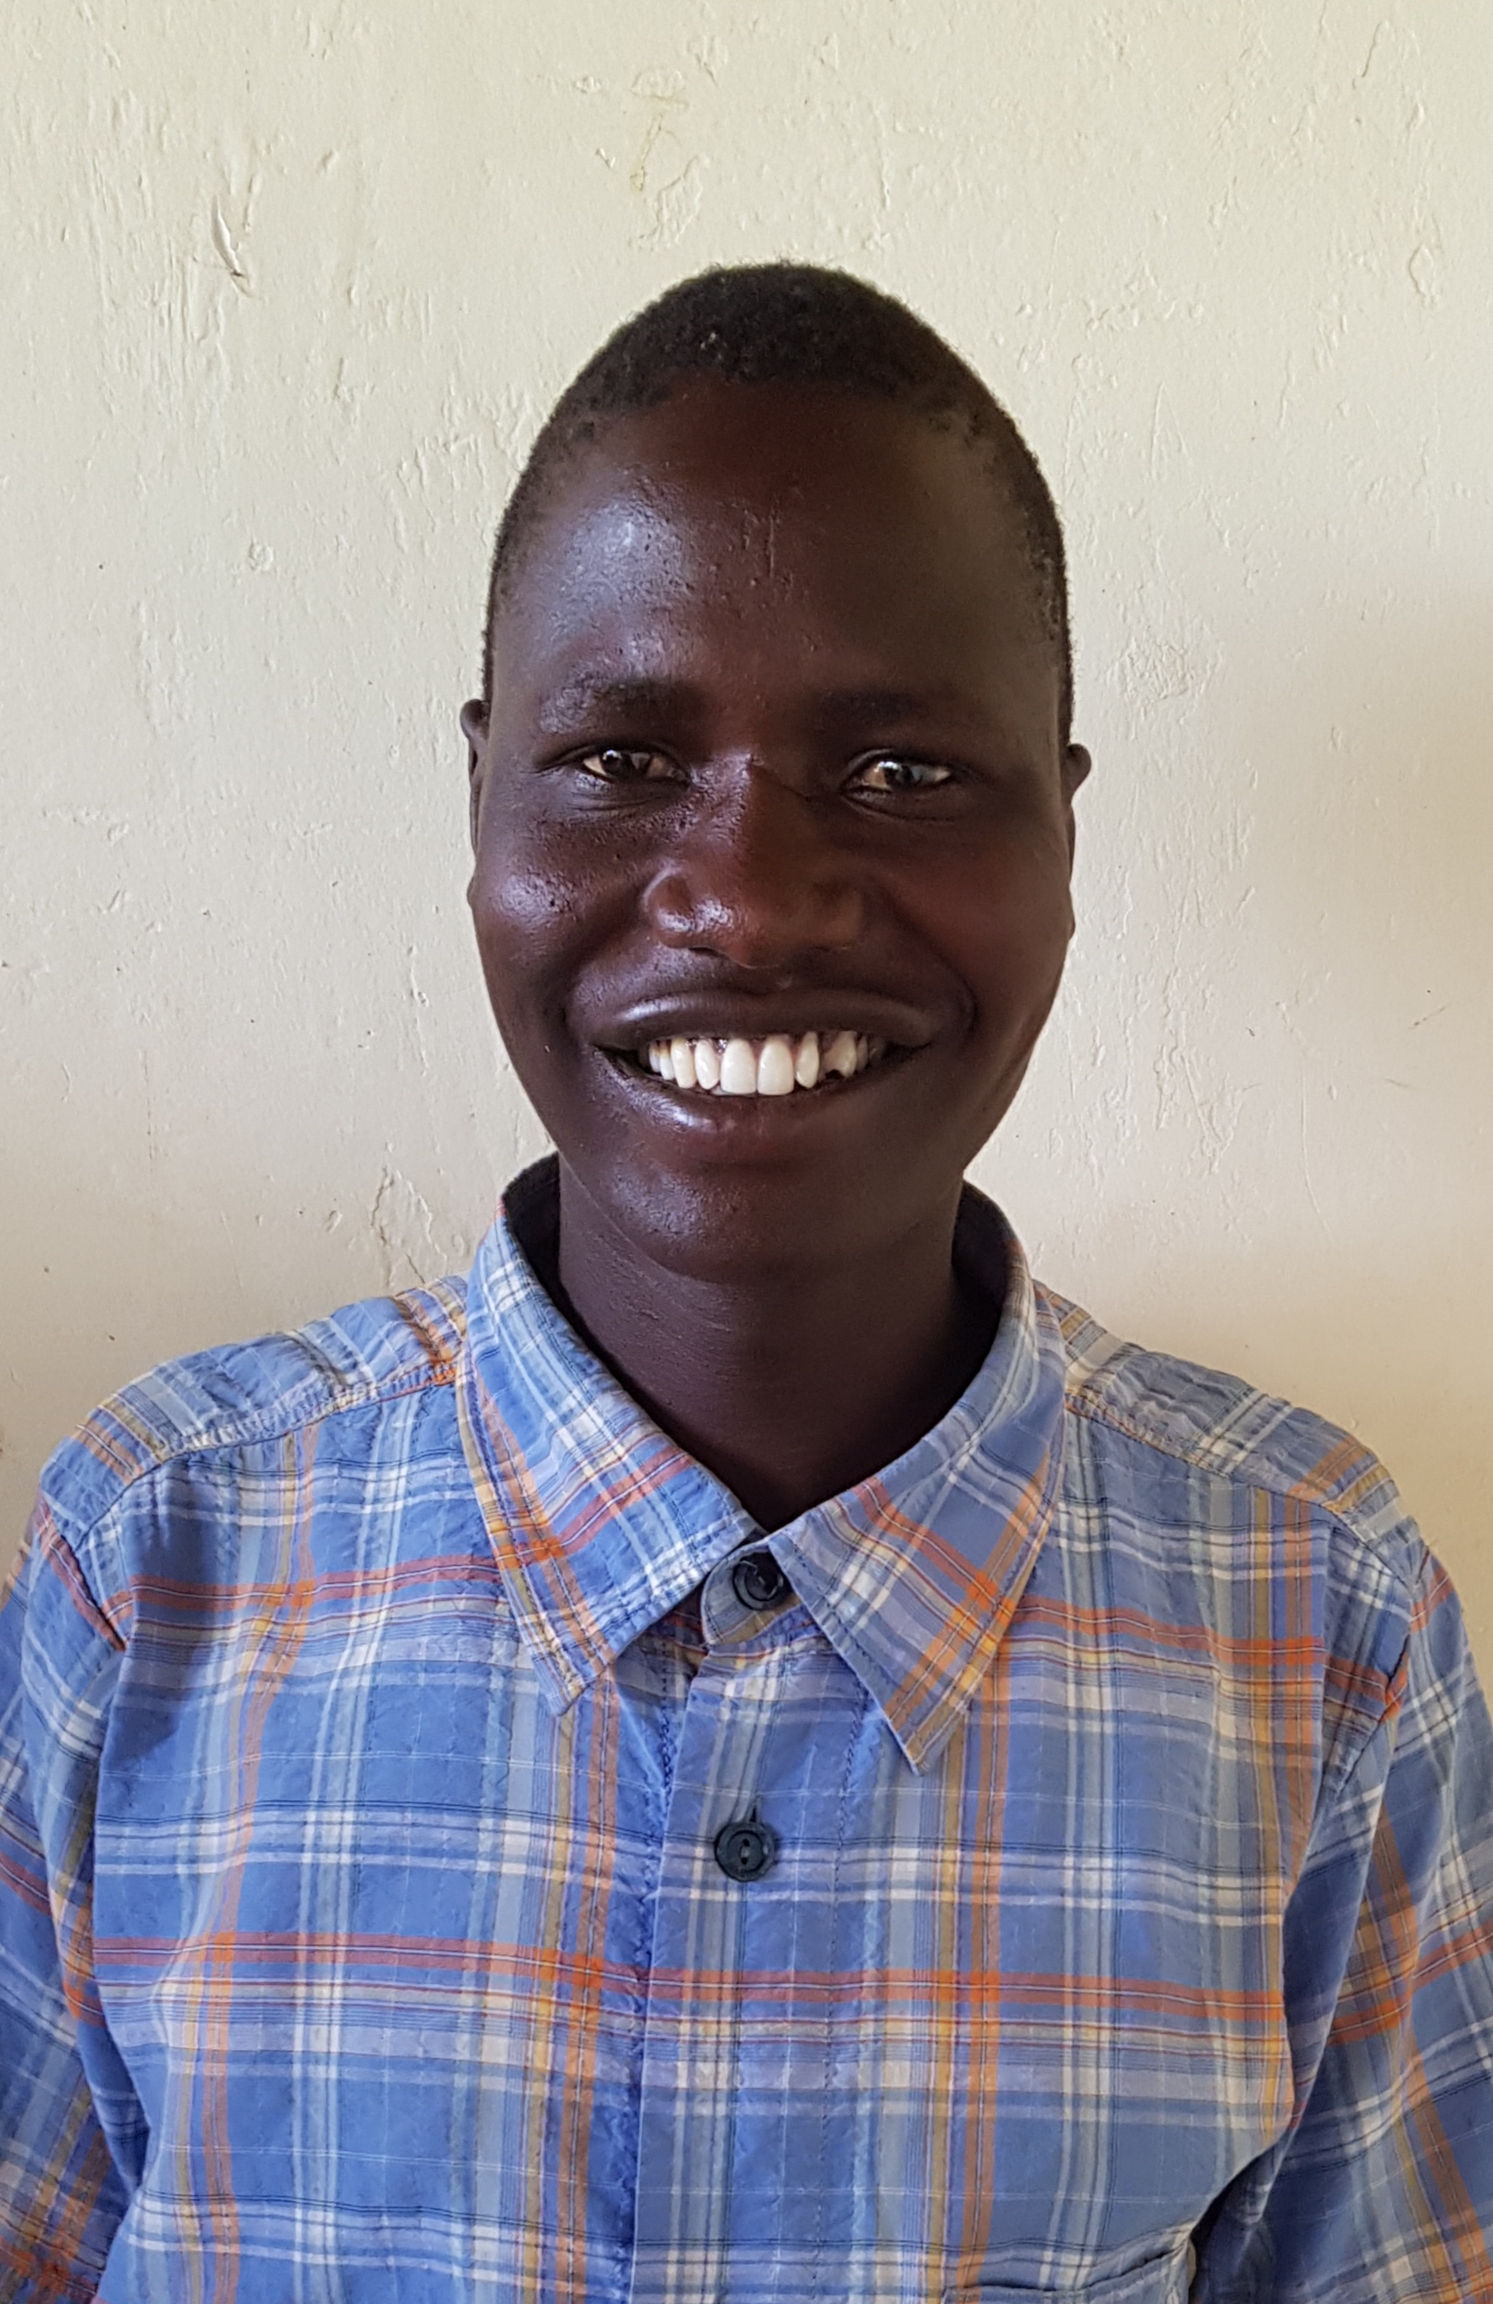 Abura's Father got sick and died in 2014. His Mother is Ichumar Sabina. They are Catholics from Katakou. He wants to be a Lab Technician. He has been one of the hardest working students in his class.